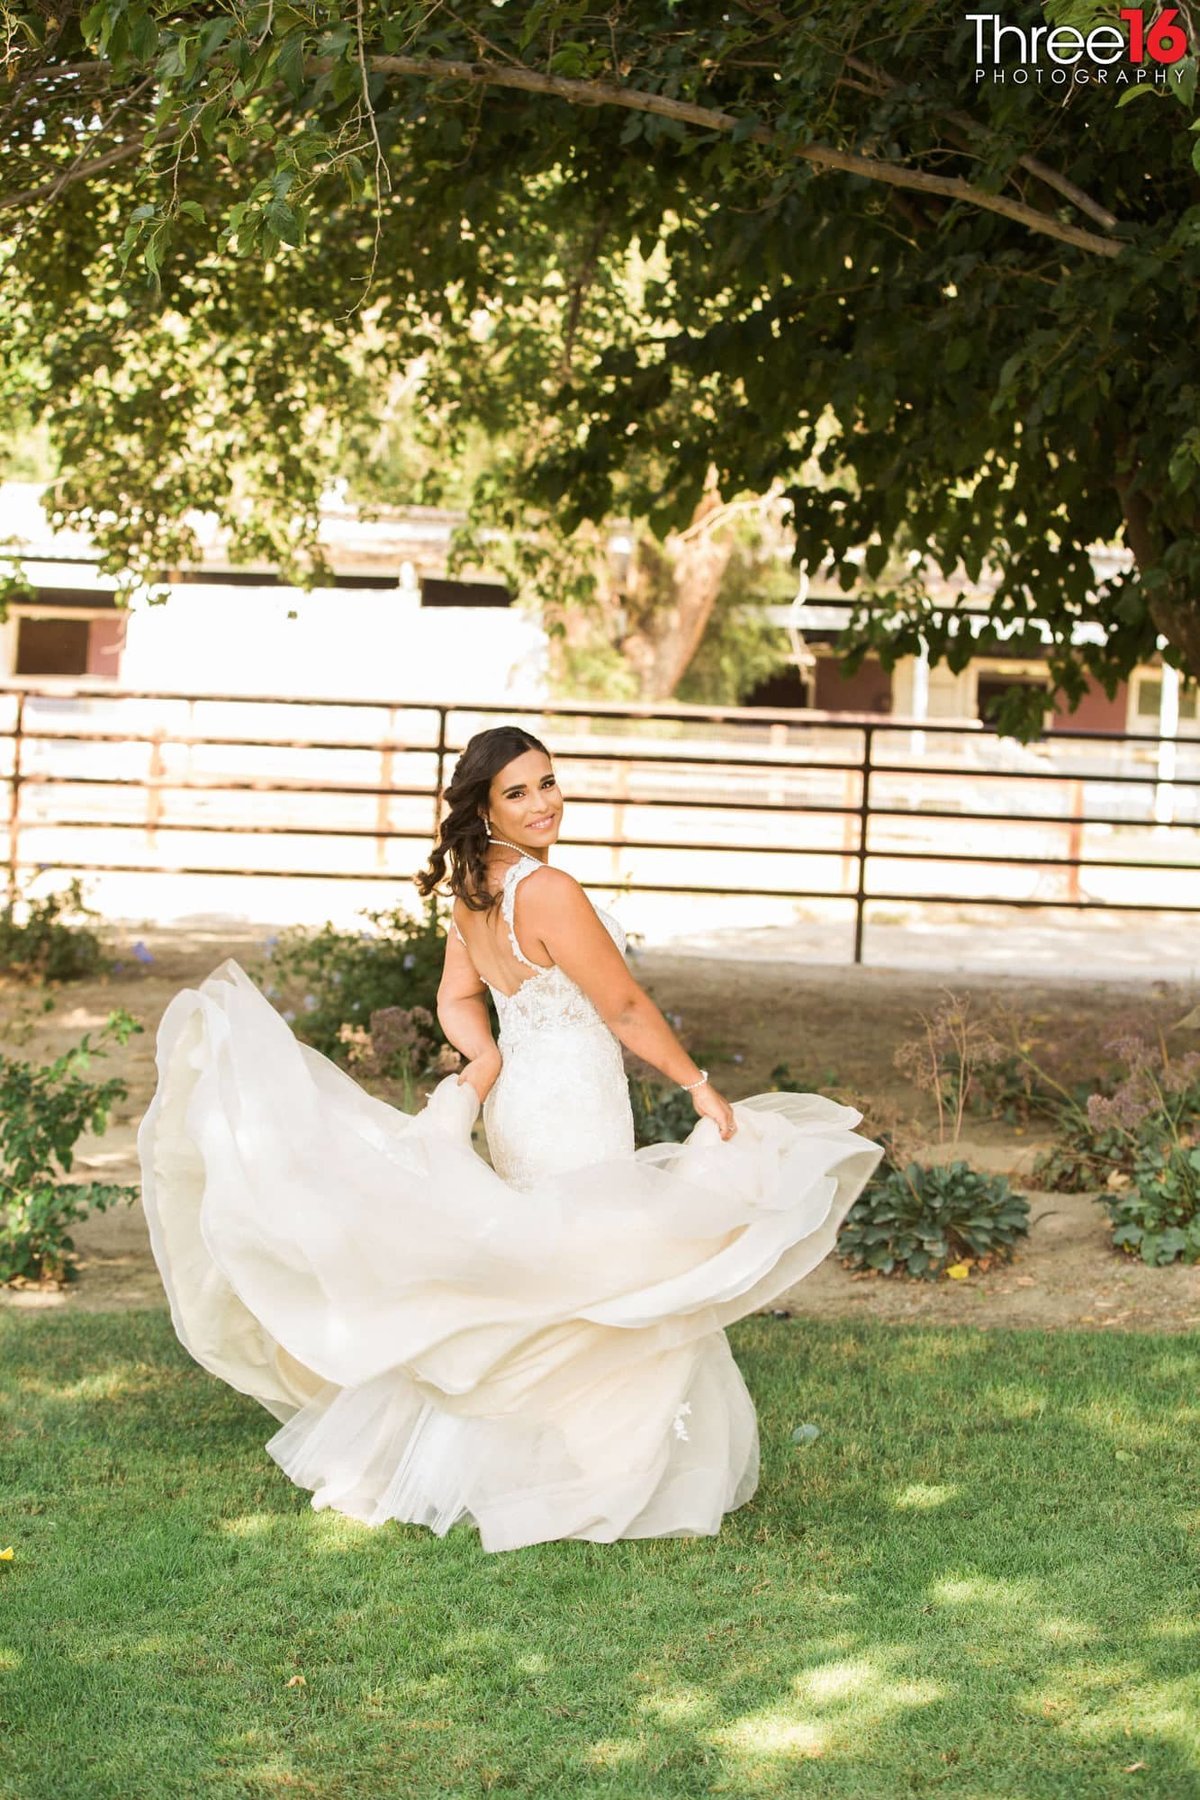 Bride twirls her fanned out wedding dress during a photo session